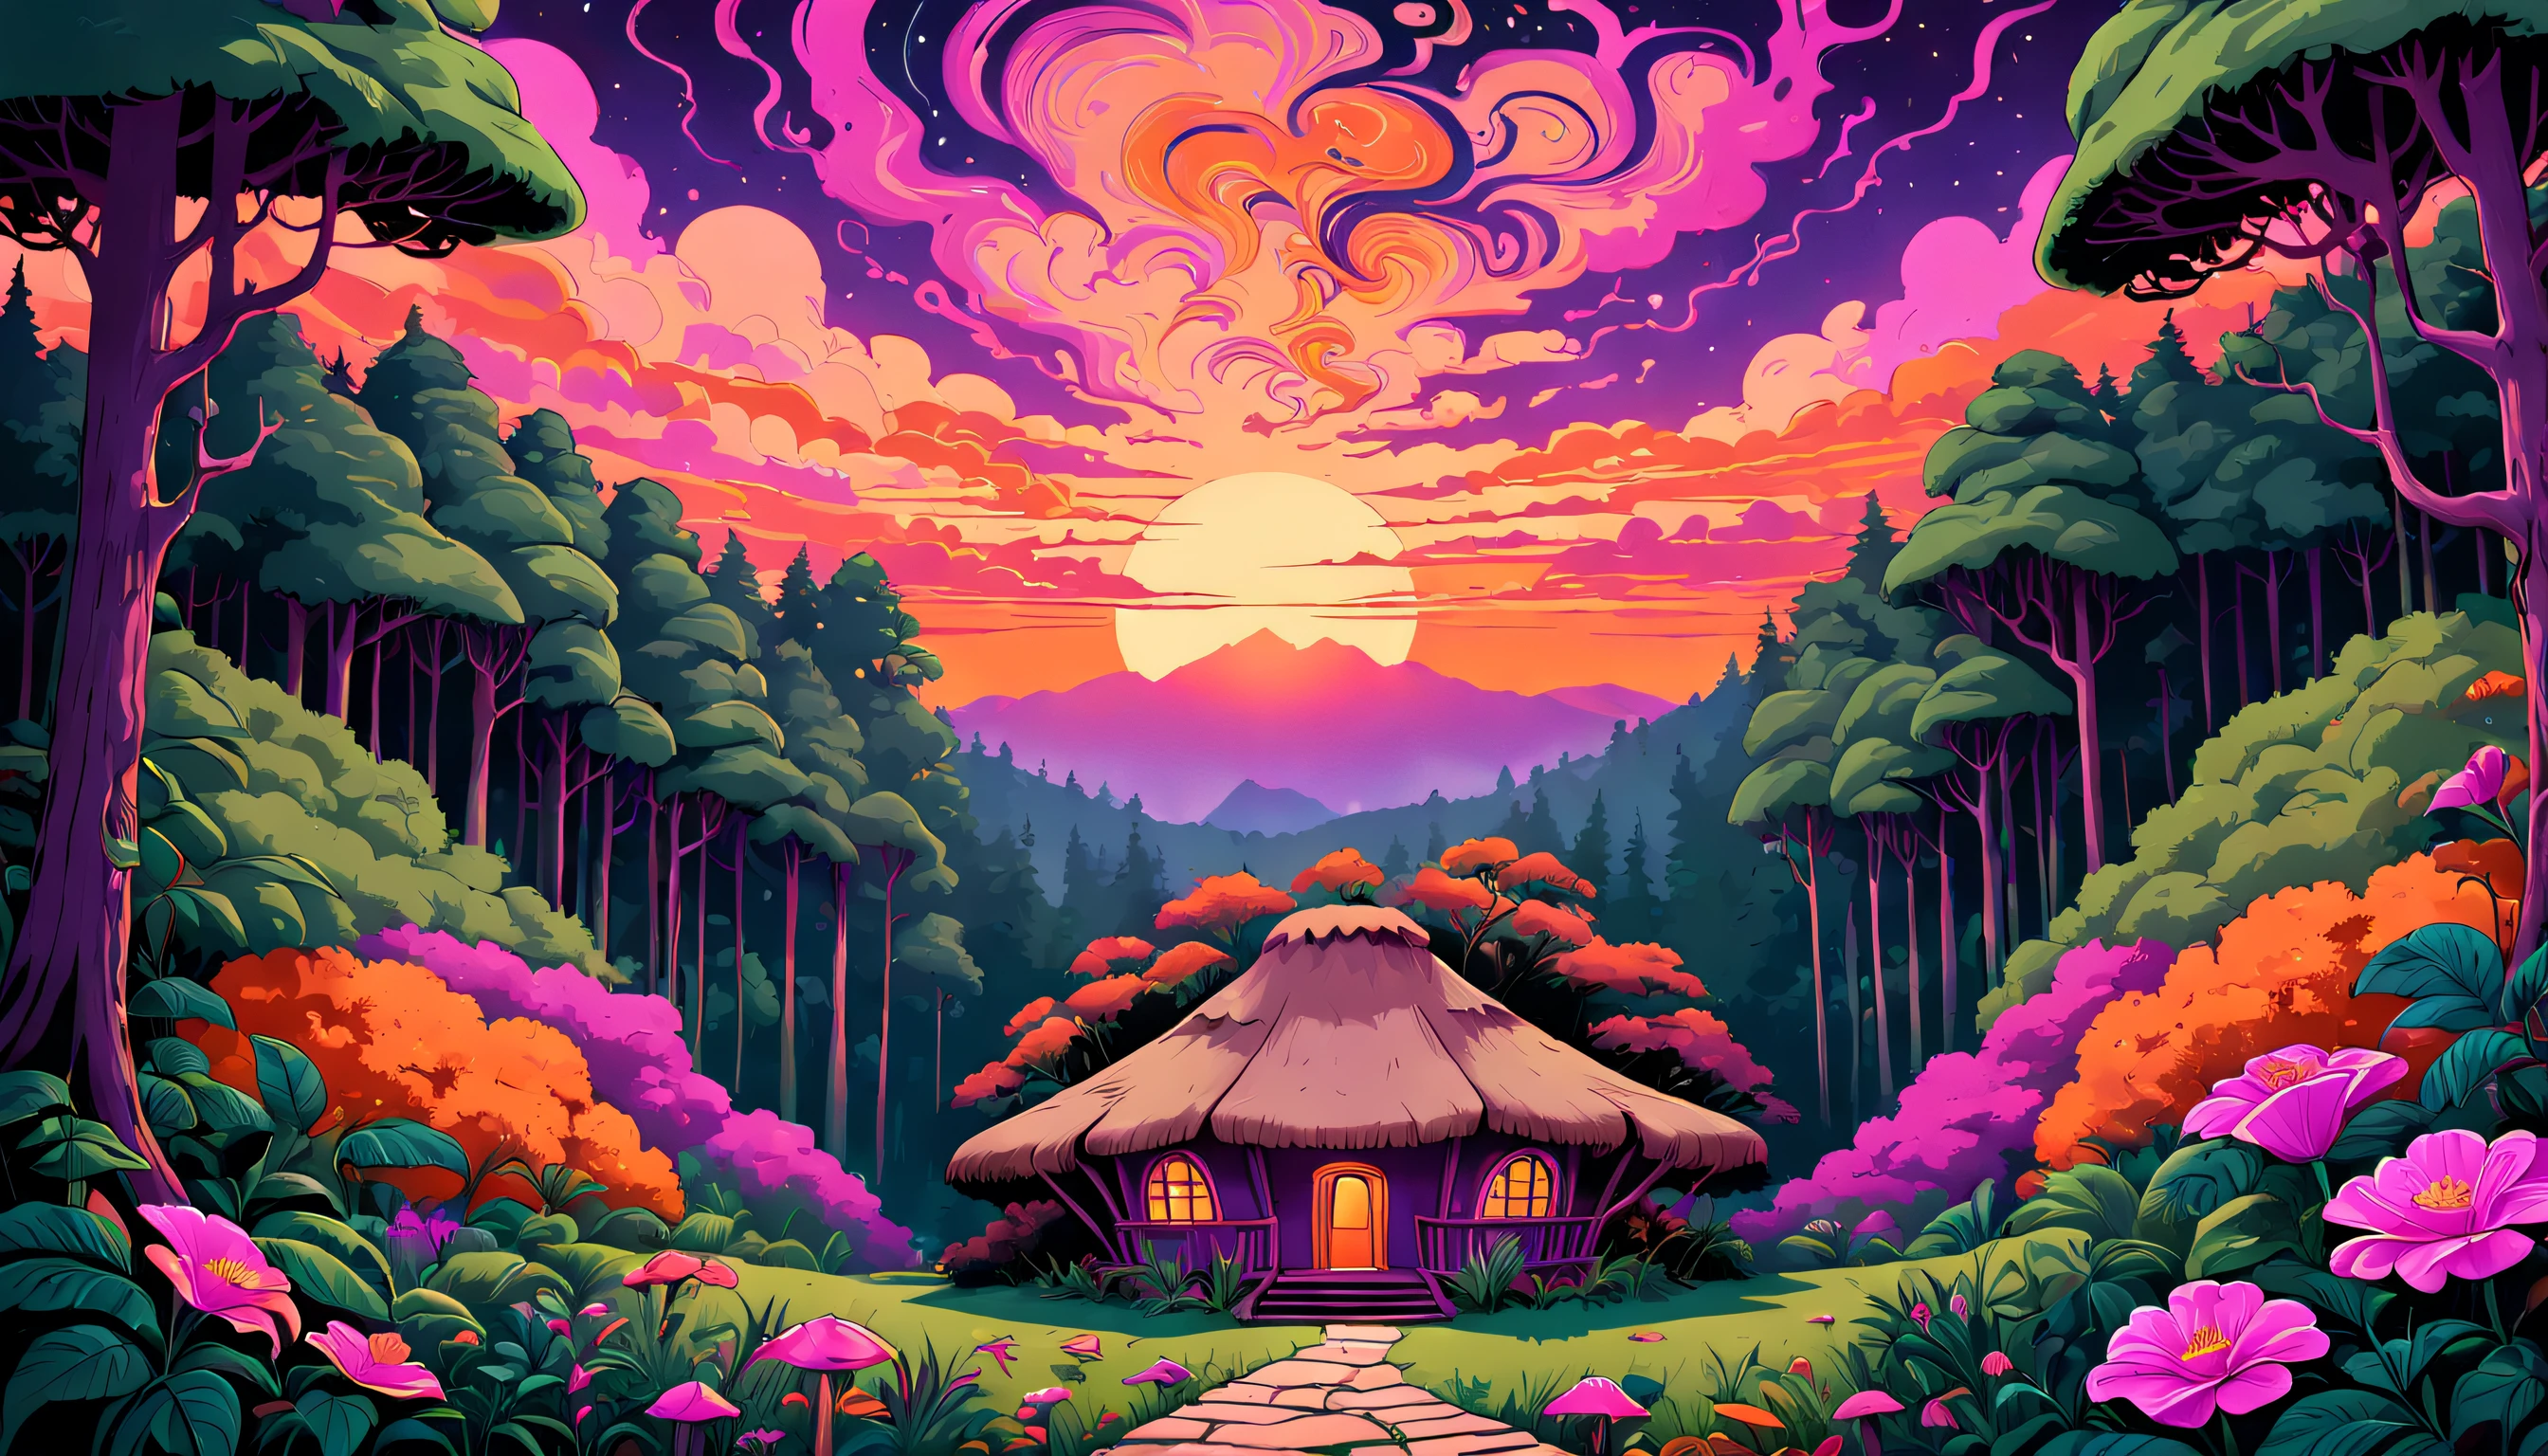 Mysterious mountain cabin nestled between dense trees and a village in between, Psychedelic forests, With a breathtaking sunset sky flipping vibrant, warm shades of purple, rosa e laranja, creating an atmosphere of curiosity and intrigue.